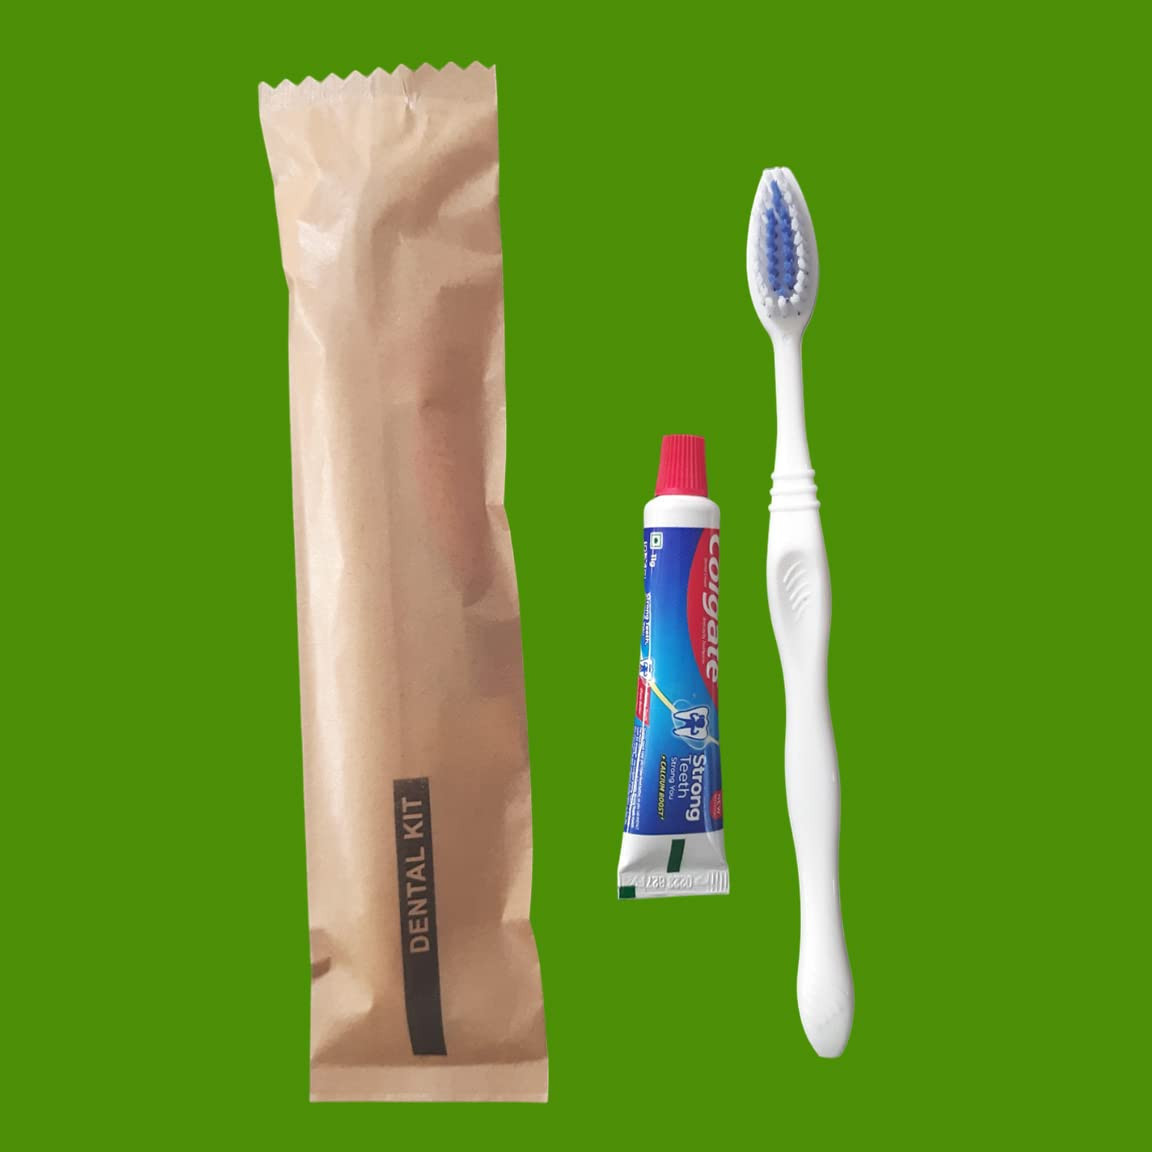 Zicniccom-50-sets-Eco-friendly Dental Kit for Hotel use, thoughtfully packed in a Kraft paper pouch, containing 50 sets of dentalkits for Hotel,Hospitals,Weddding,Homestays and Resorts.